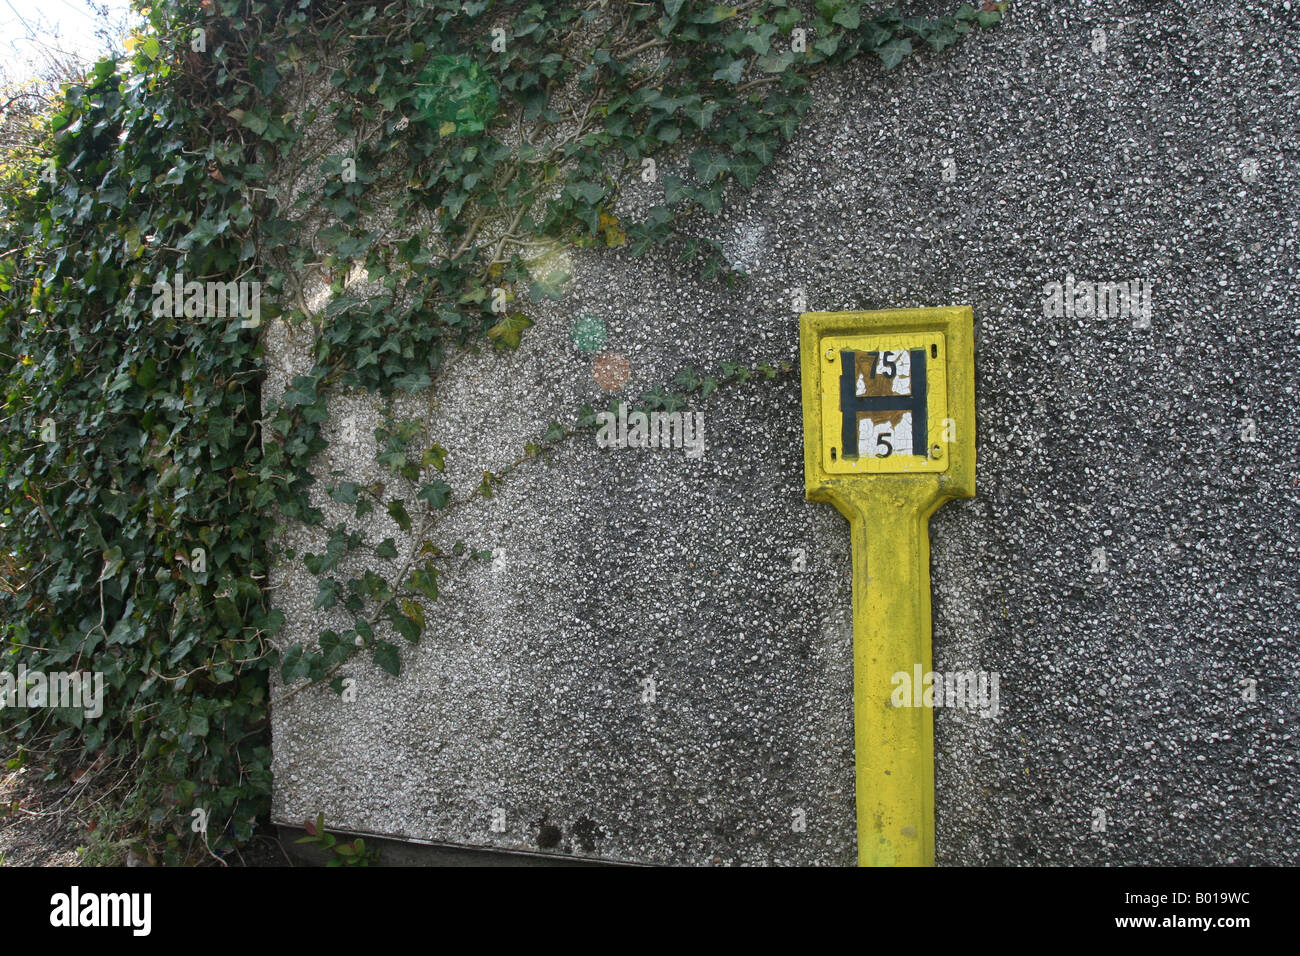 Yellow fire hydrant against pebble dashing with ivy Stock Photo